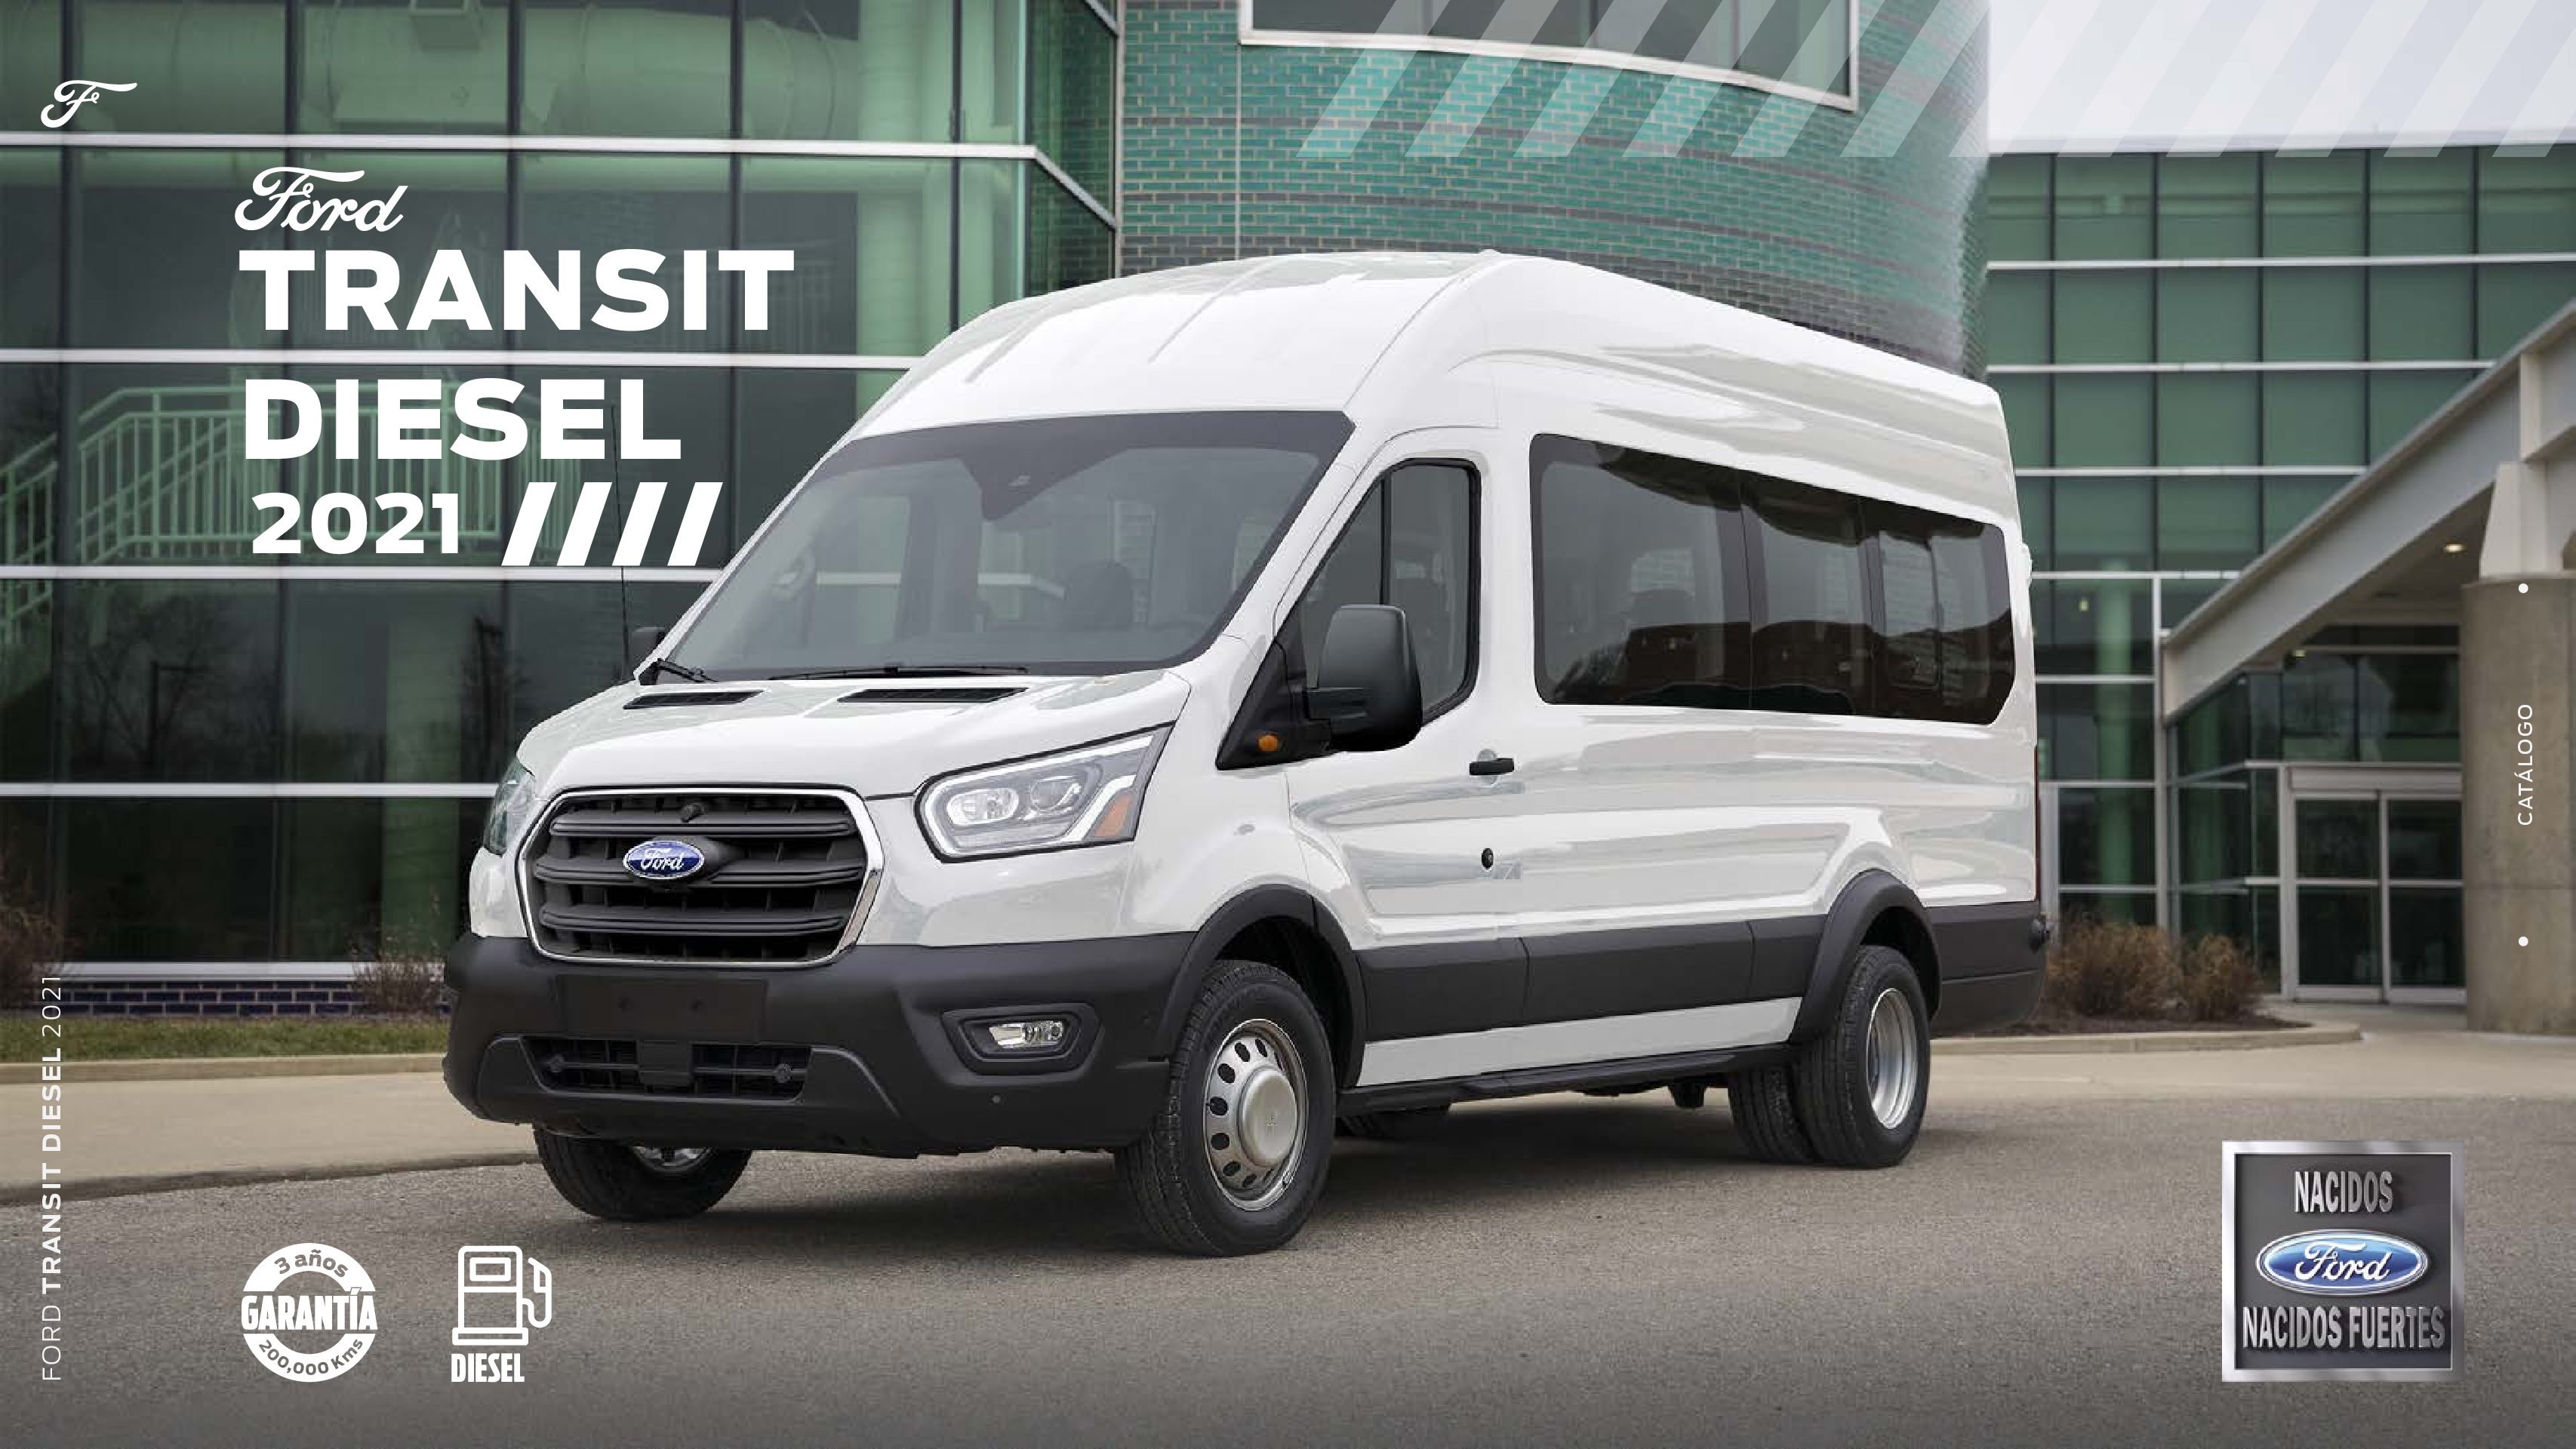 Форд транзит 2021г. Ford Transit 2021. Ford Transit 2021 фермер. Ford Transit Minibus. Форд Транзит 2021 года.